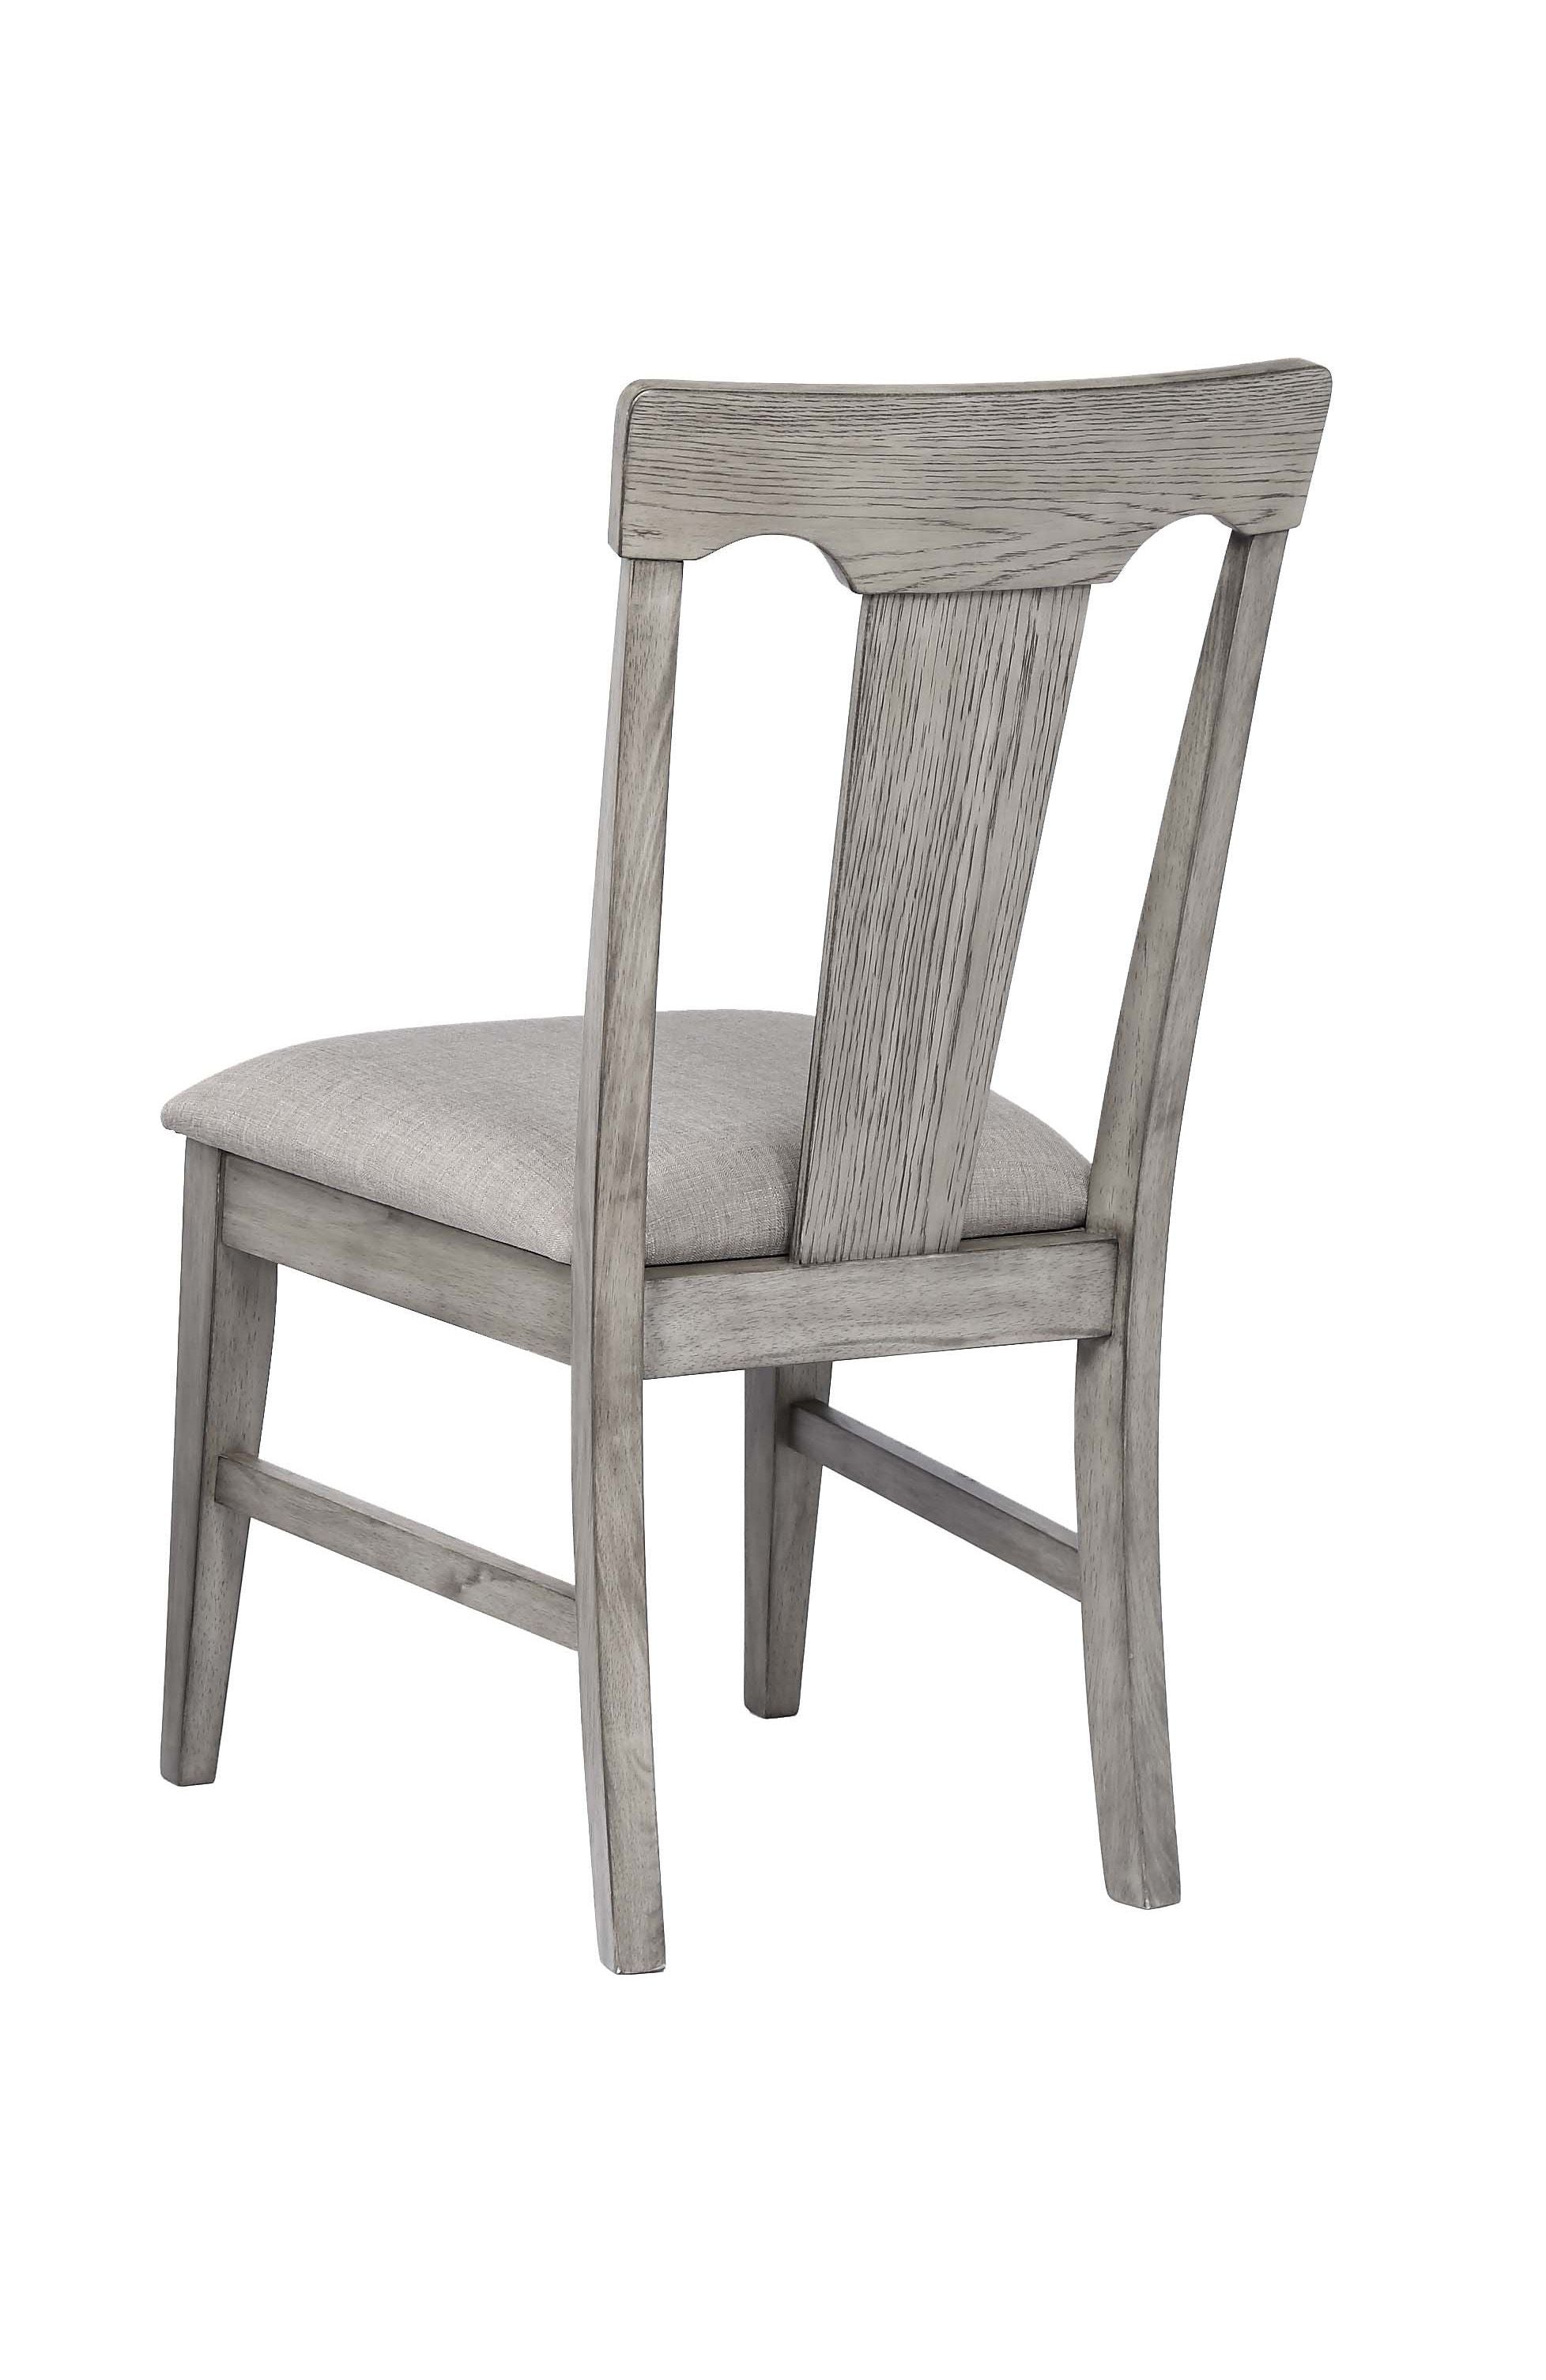 ECI Furniture Graystone Side Chair With Soft Gray Upholstery(2pcs)